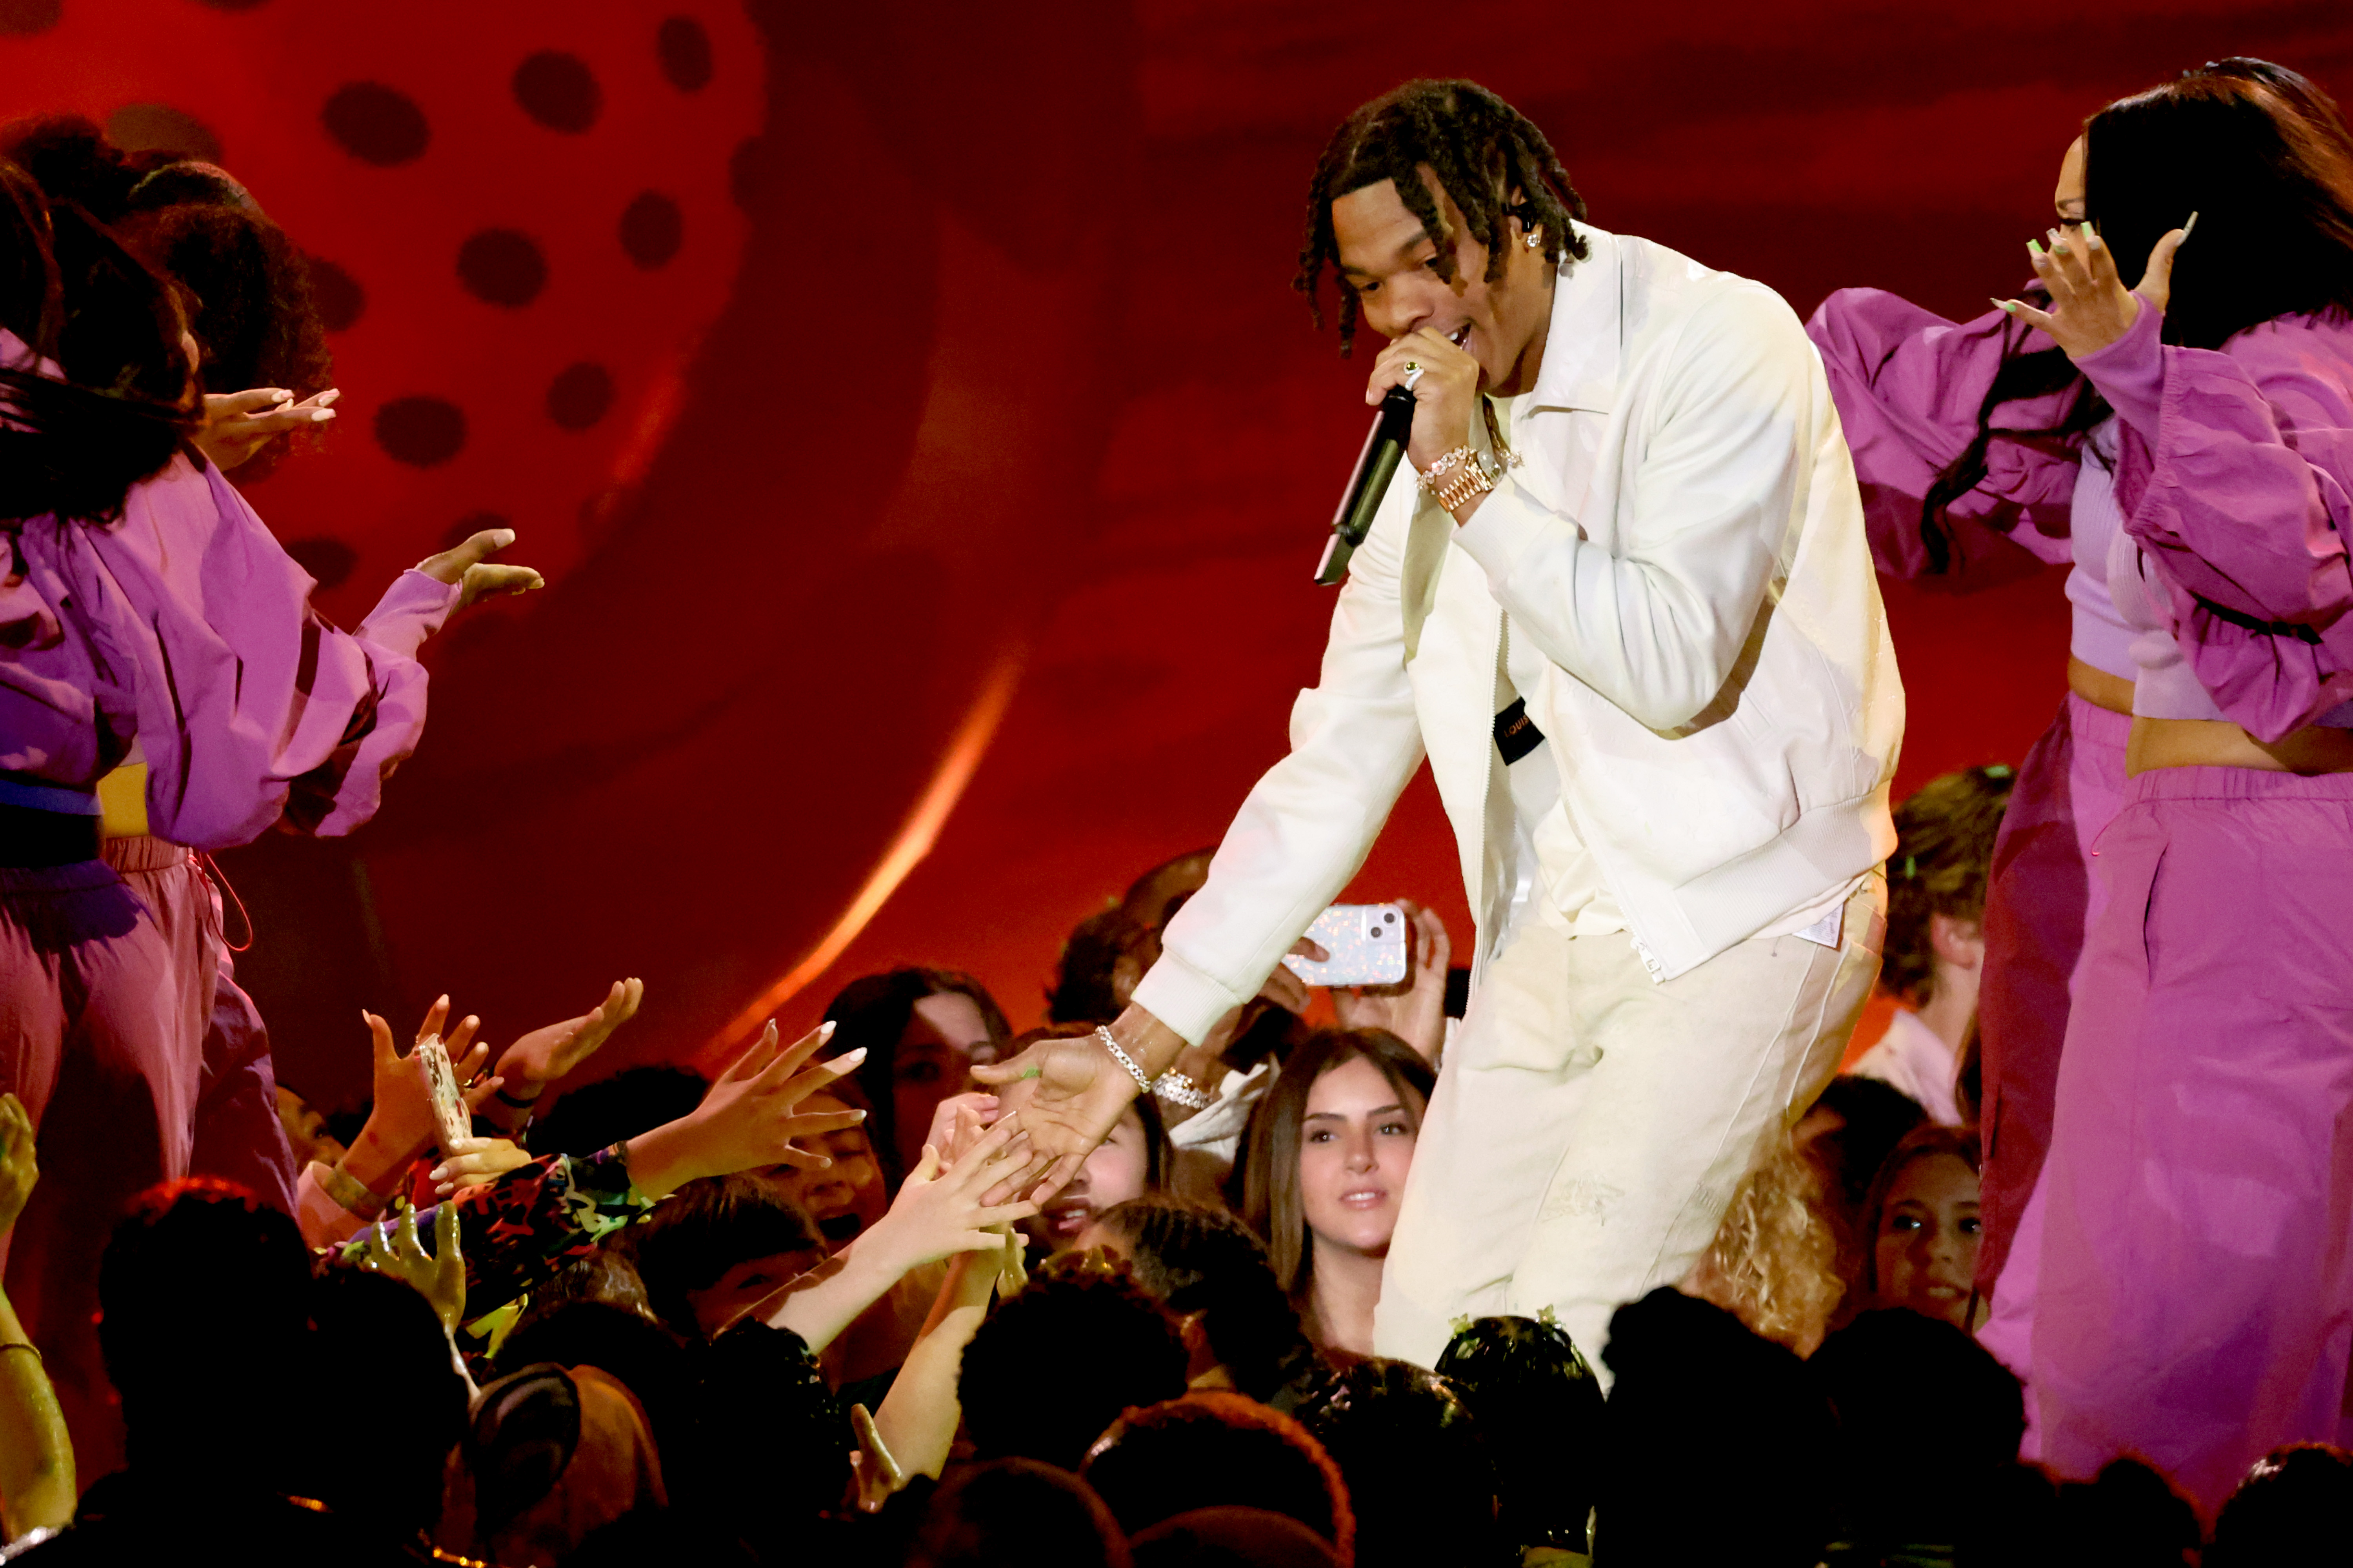 Lil Baby performs onstage during the 2023 Nickelodeon Kids' Choice Awards at Microsoft Theater on March 04, 2023 in Los Angeles, California. (Photo by Monica Schipper/Getty Images for Nickelodeon)